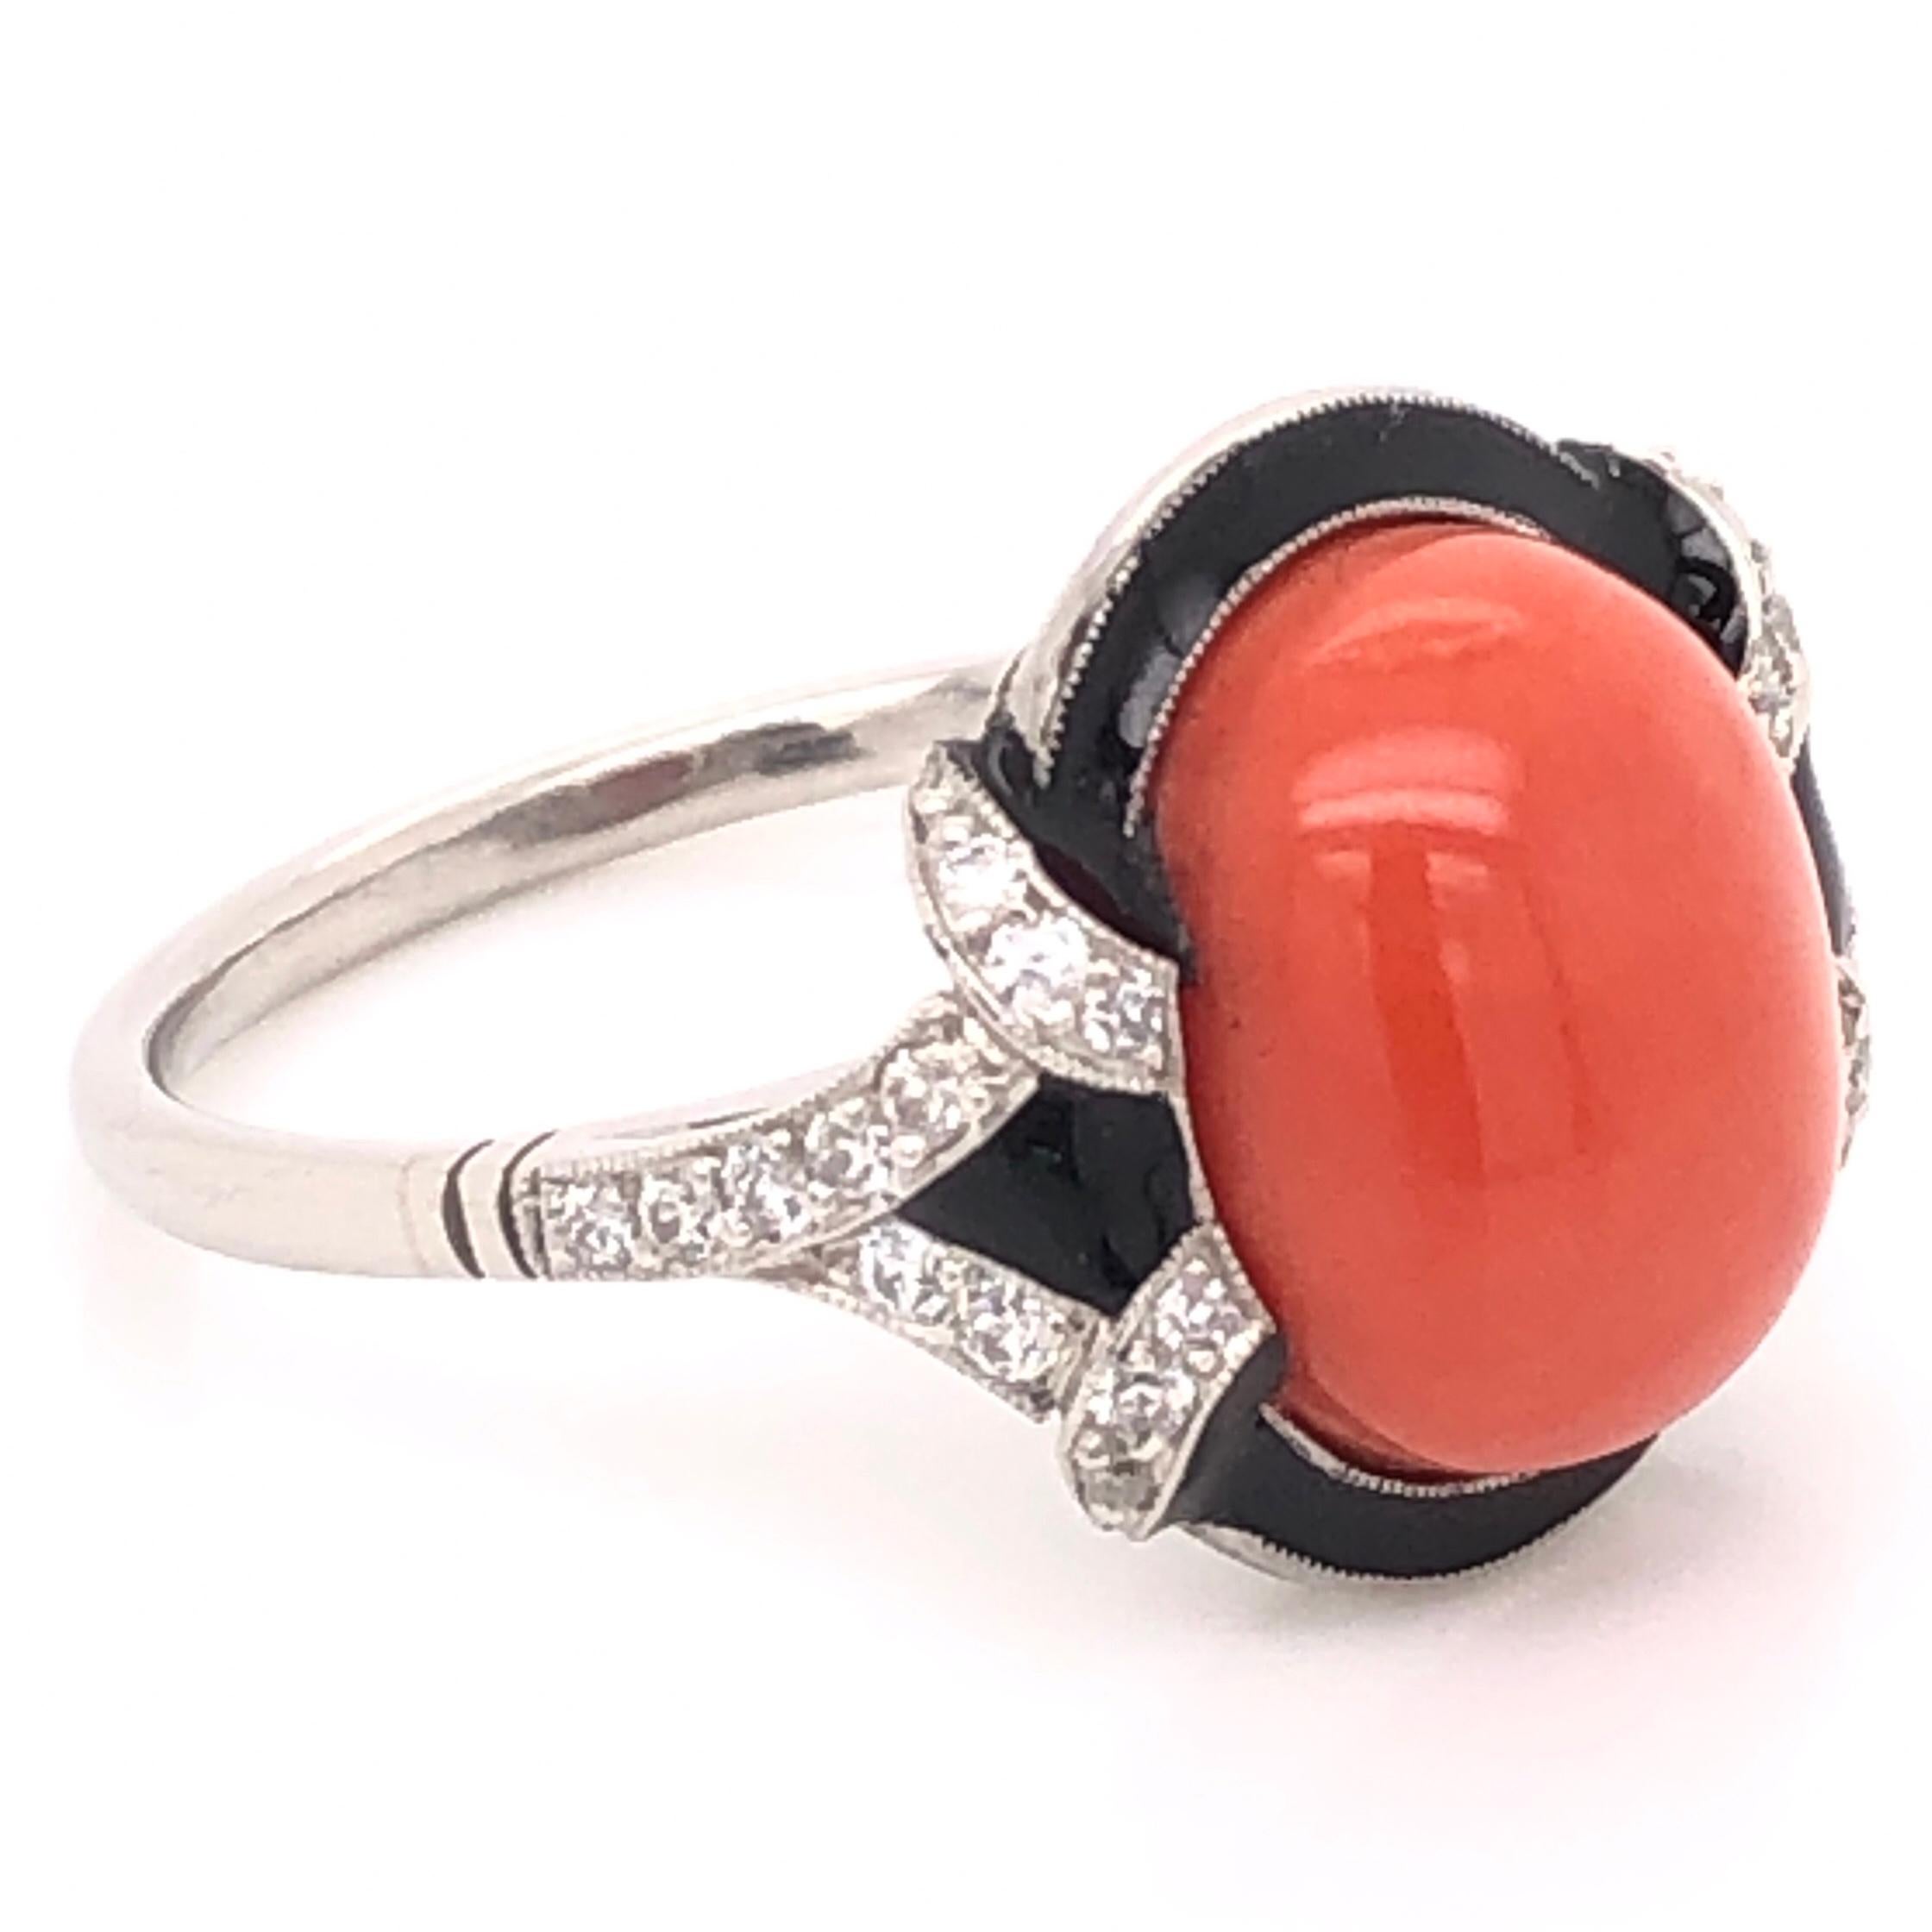 Simply Beautiful and Finely Detailed Platinum Cocktail Ring center securely set with a 5.81 Carat Oval Cabochon Coral accented by Black Enamel and Diamonds, approx. 0.32 total carat weight. The head is 15.5mm North-South x 16.5mm East-West. Hand